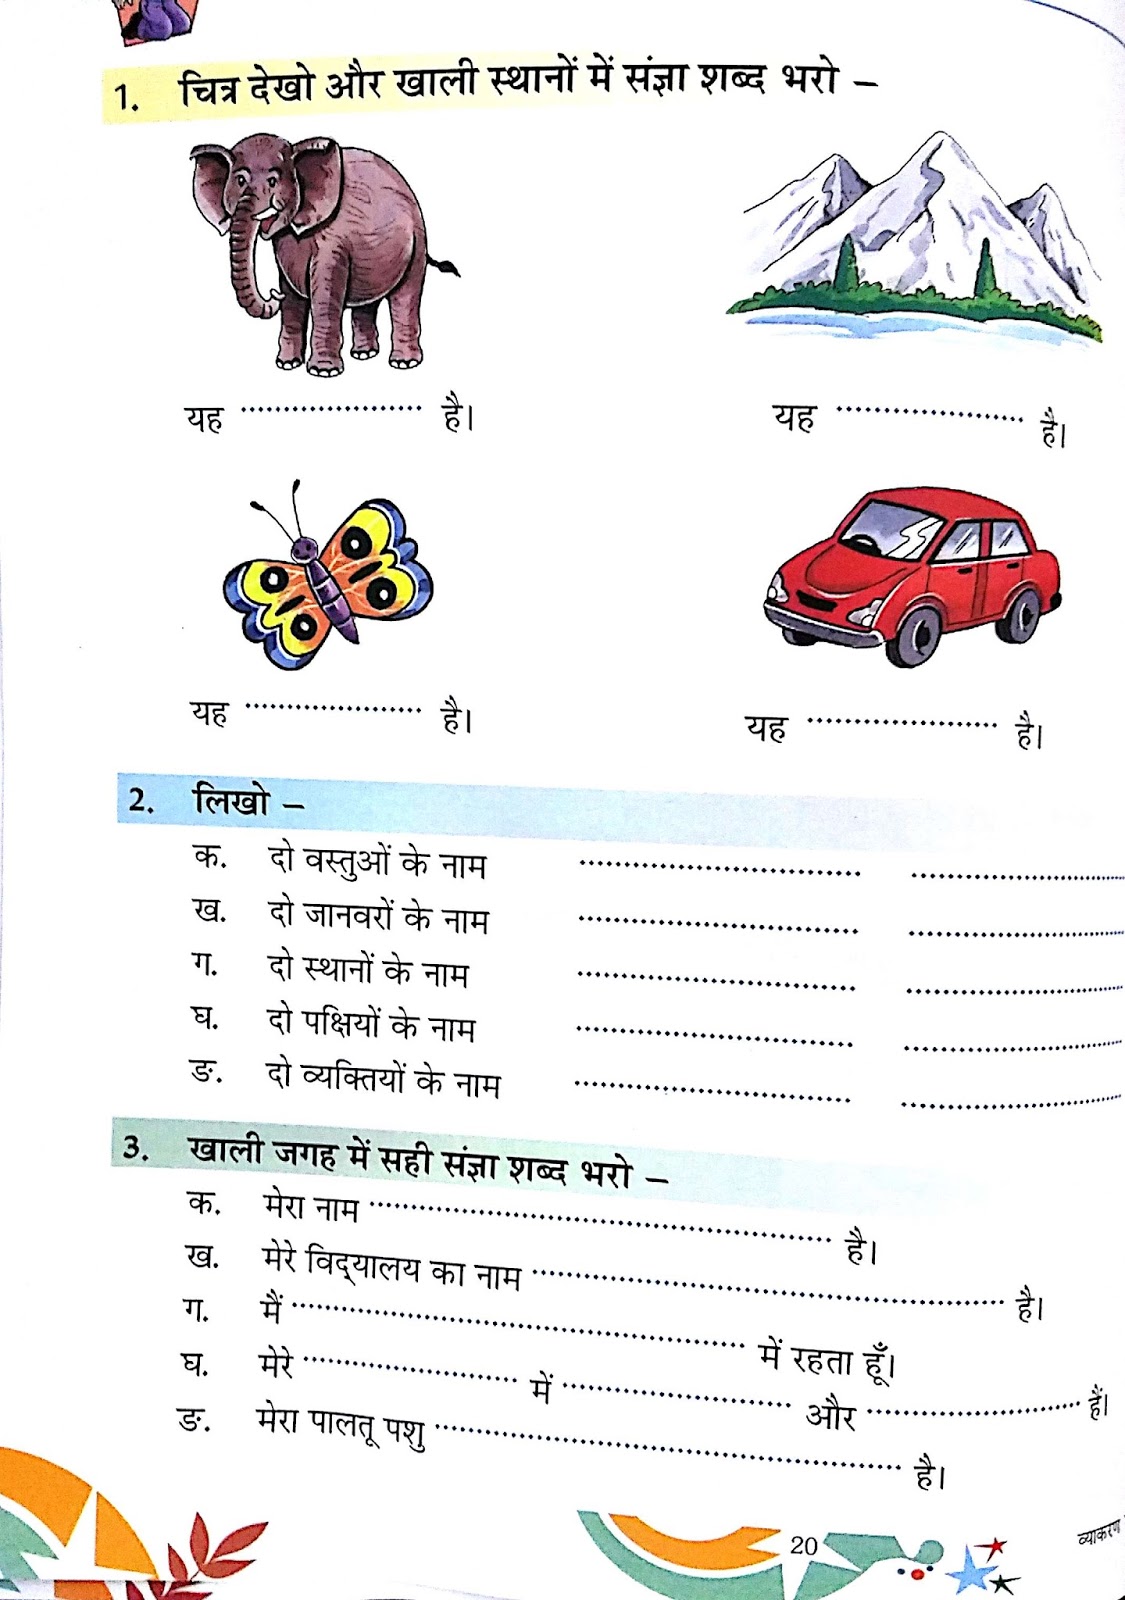 hindi-grammar-work-sheet-collection-for-classes-5-6-7-8-noun-work-sheets-for-classes-3-4-5